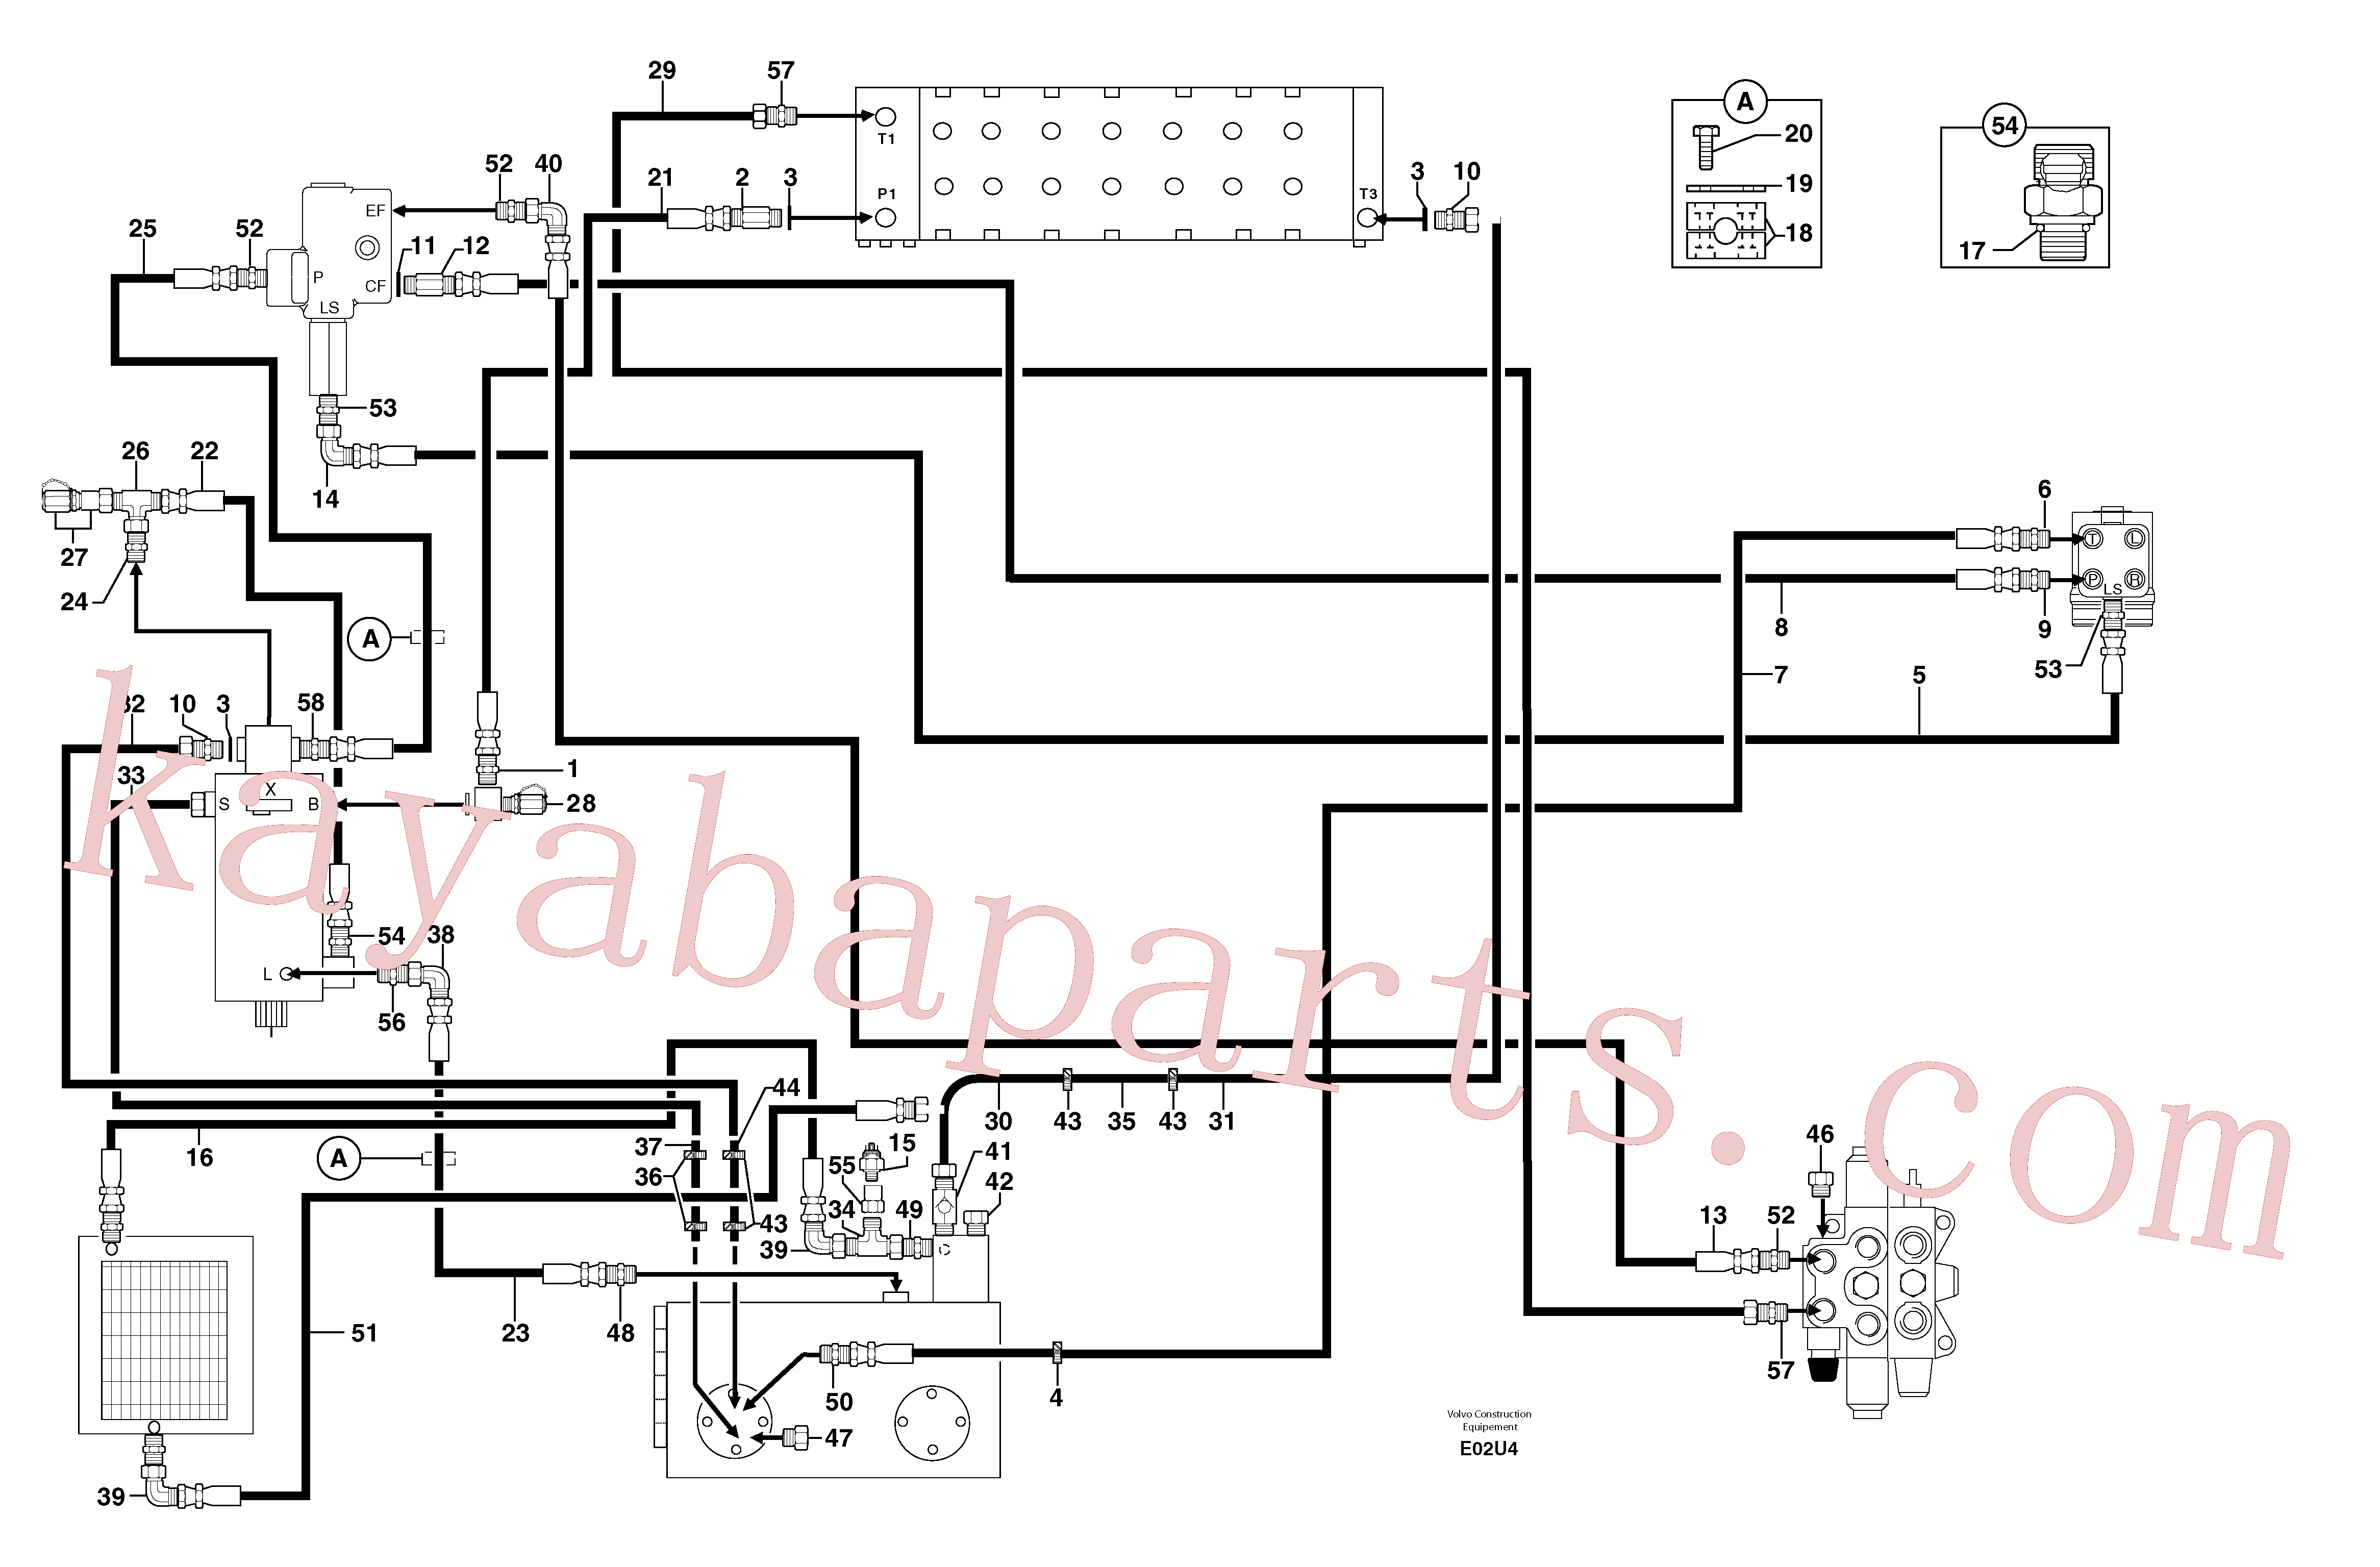 PJ6010154 for Volvo Attachments supply and return circuit(E02U4 assembly)